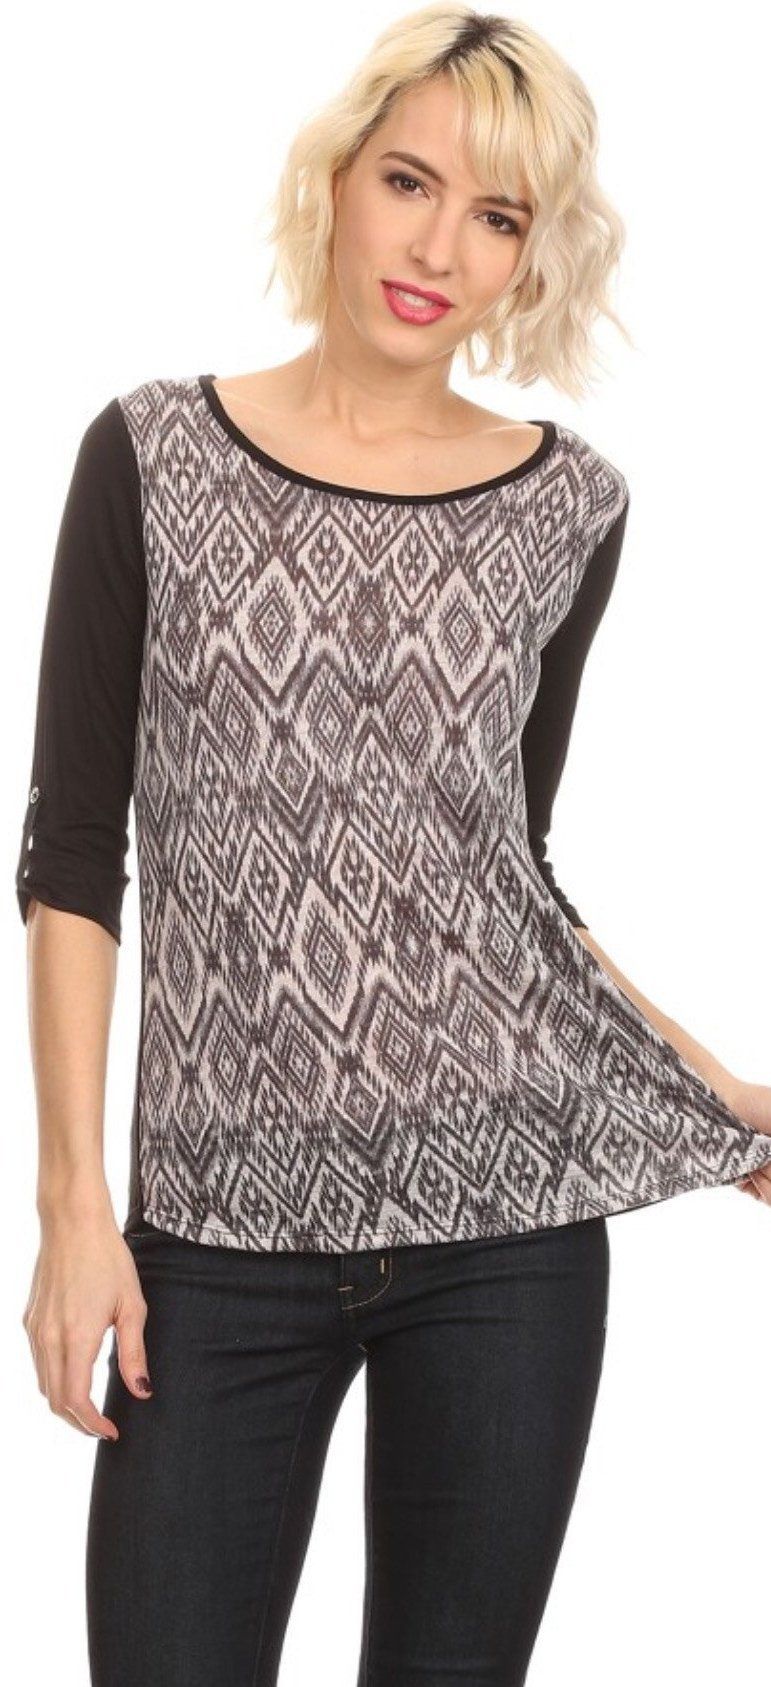 Women's Color Block Top Gray/Black: S/M/L MomMe And More